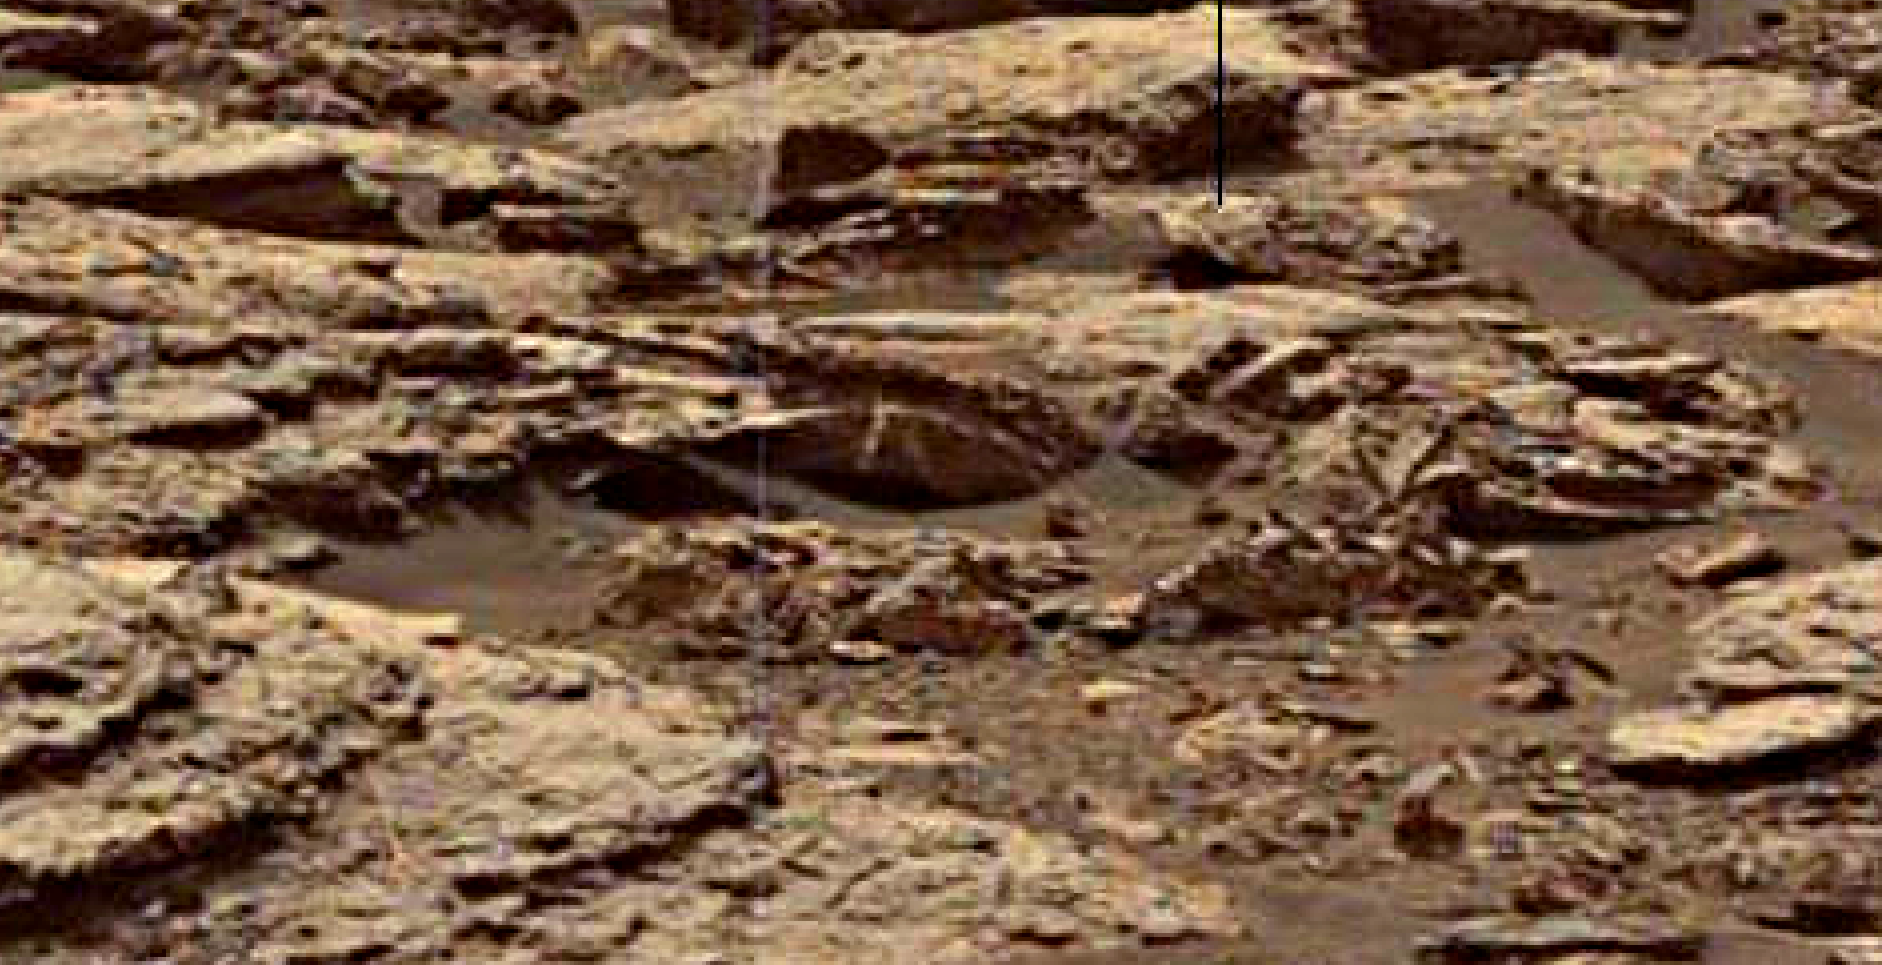 mars-sol-1485-anomaly-artifacts-18-was-life-on-mars